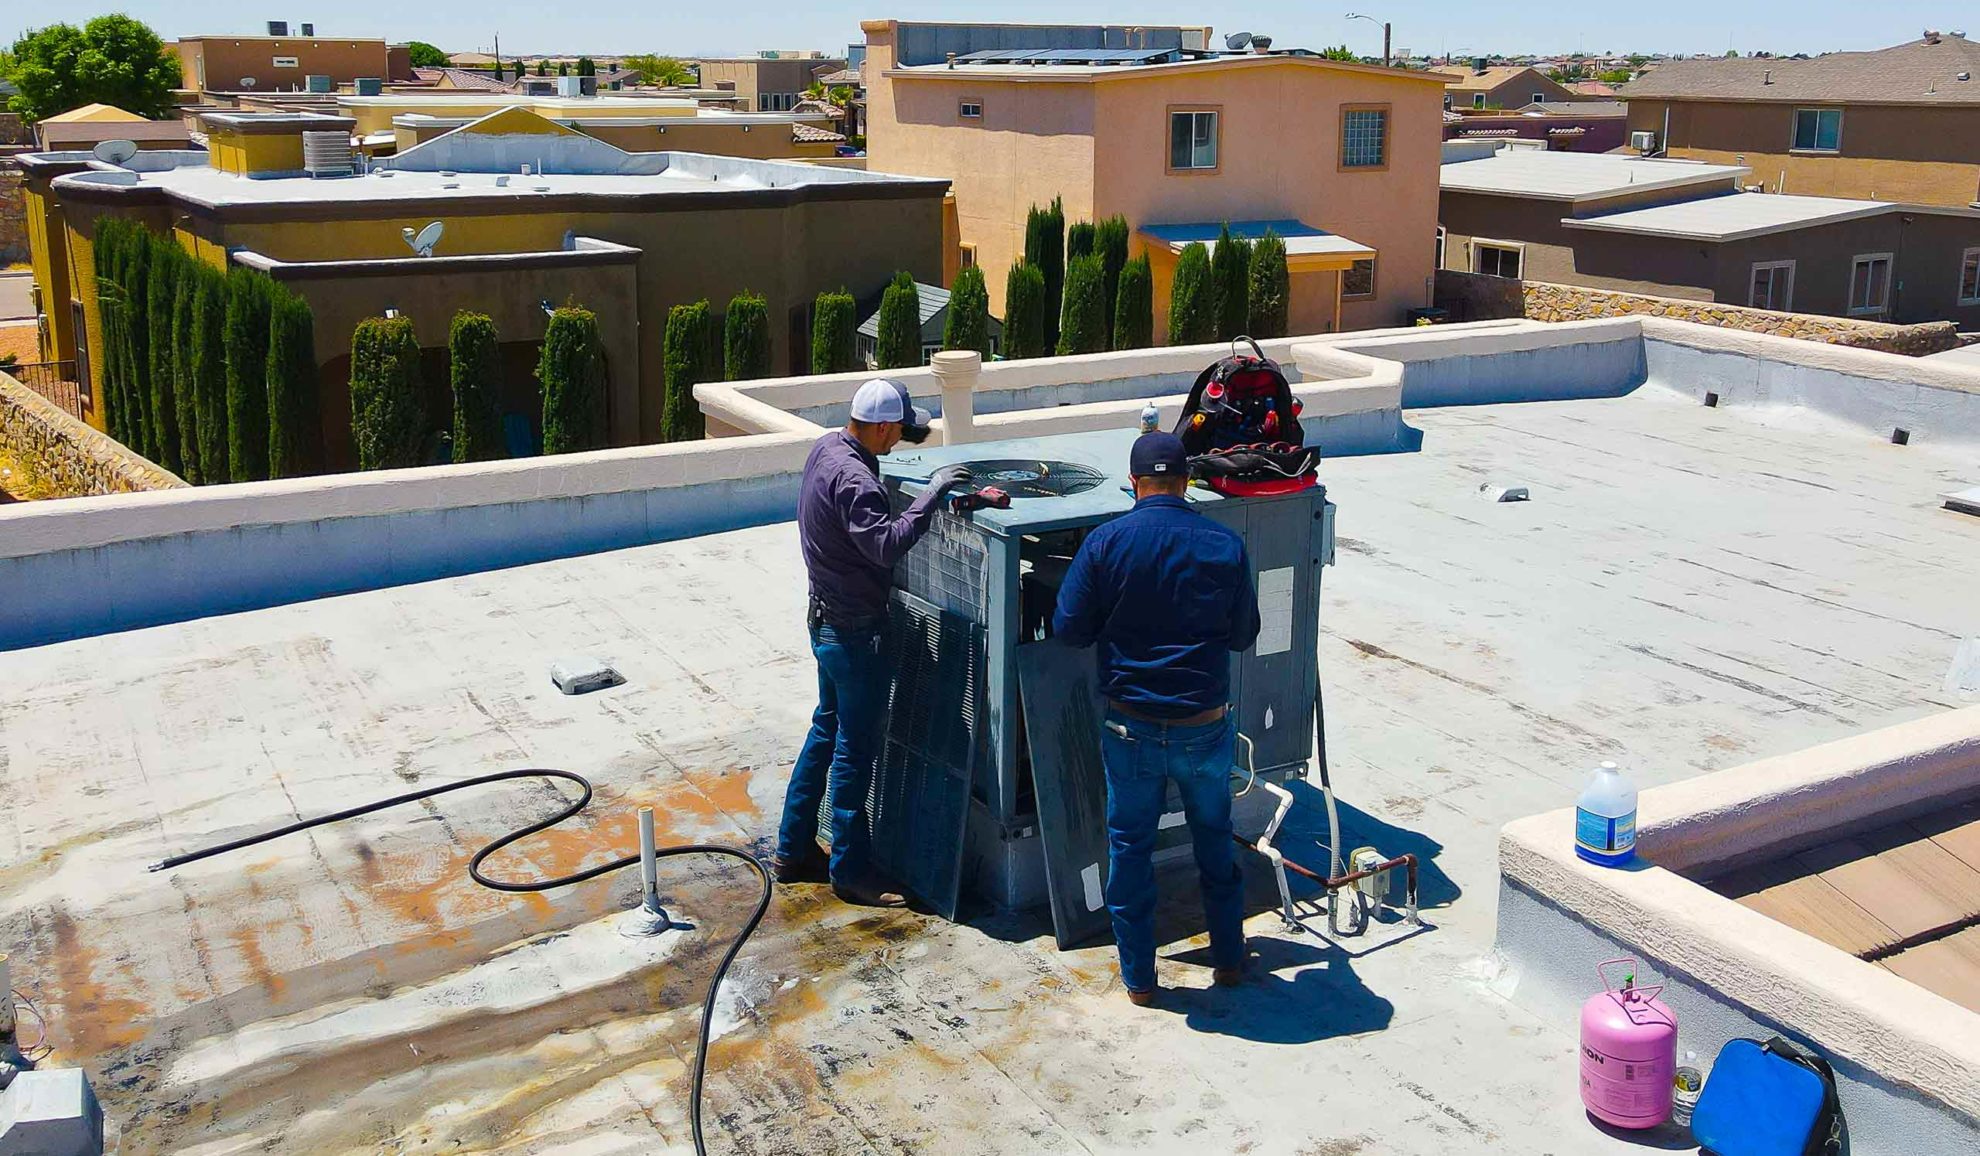 group-of-hvac-technicians-on-top-of-residential-property-repairing-unit-el-paso-tx